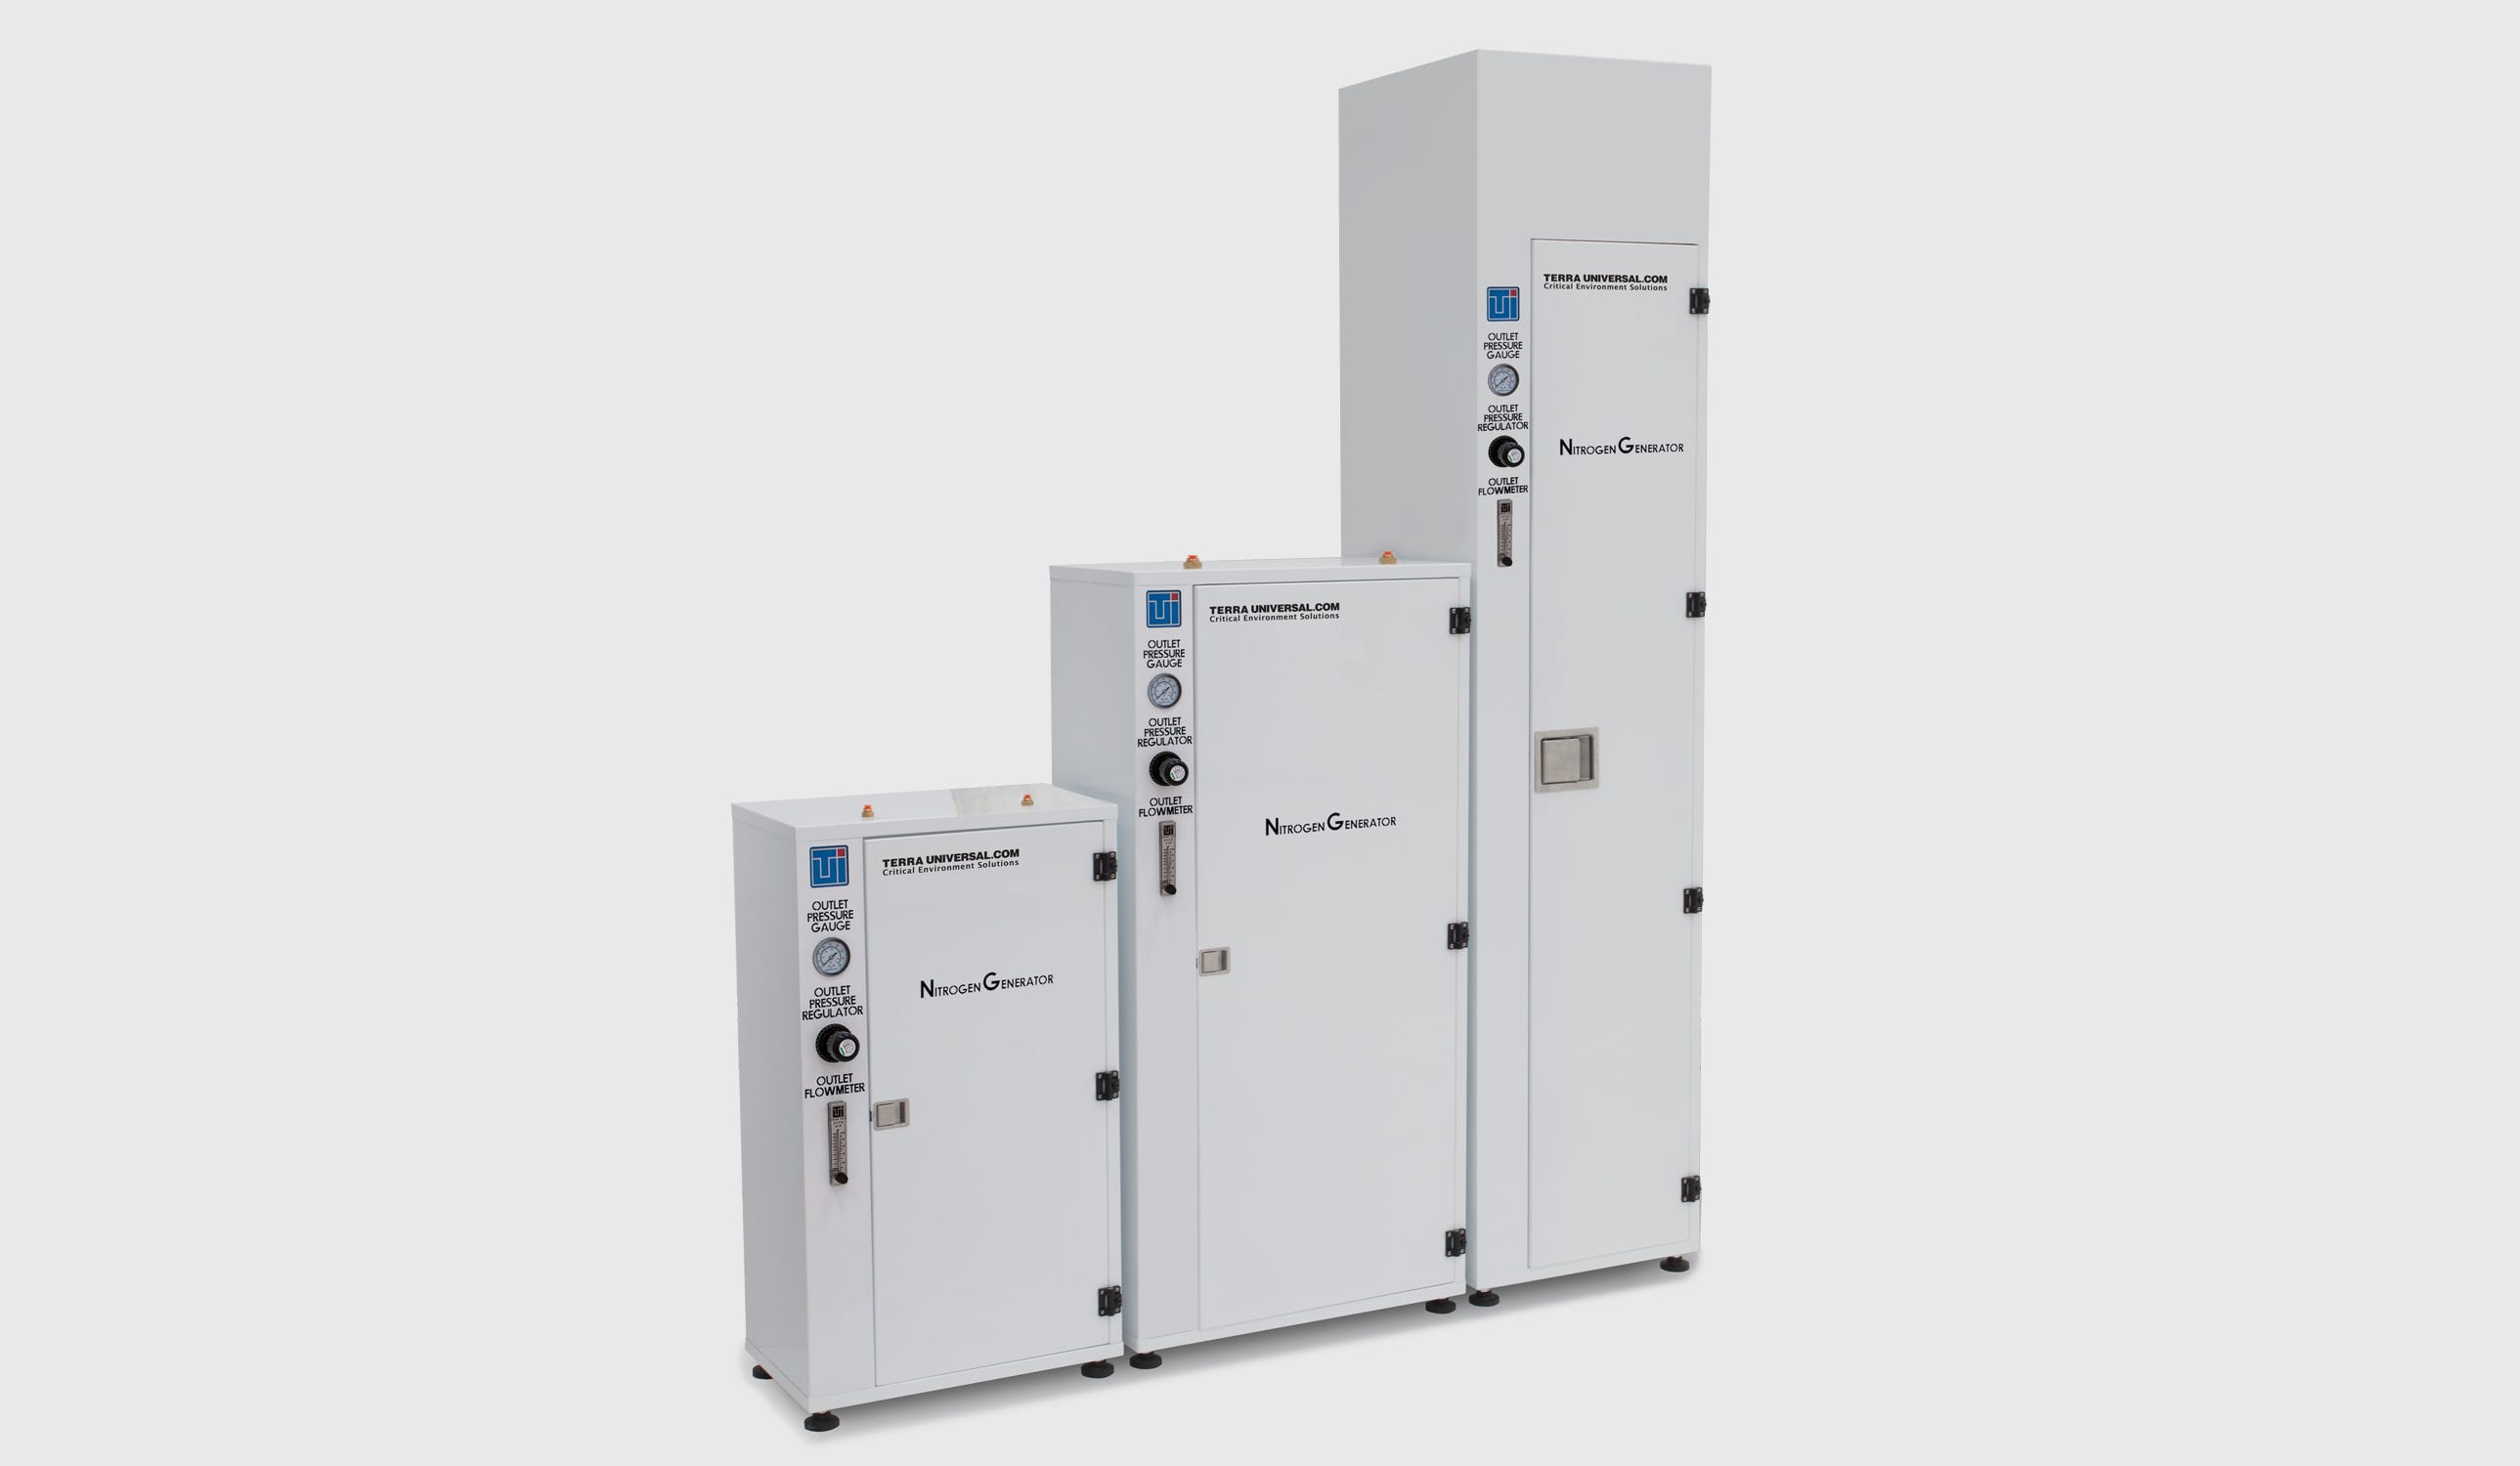 What are the Benefits of a Nitrogen Generator?